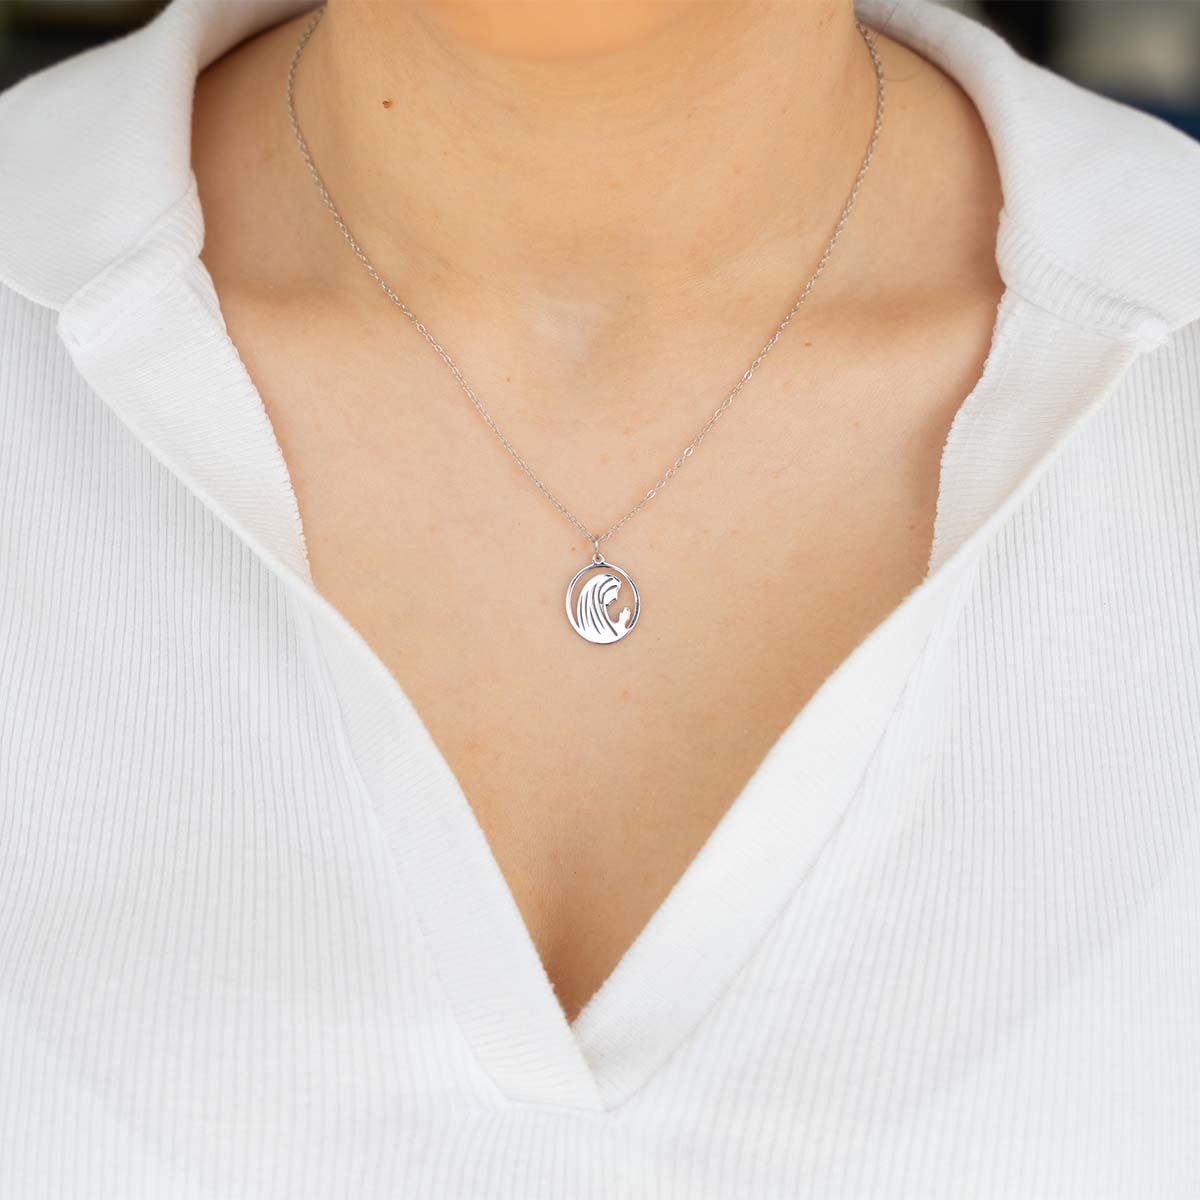 Virgin Mary Silhouette Necklace